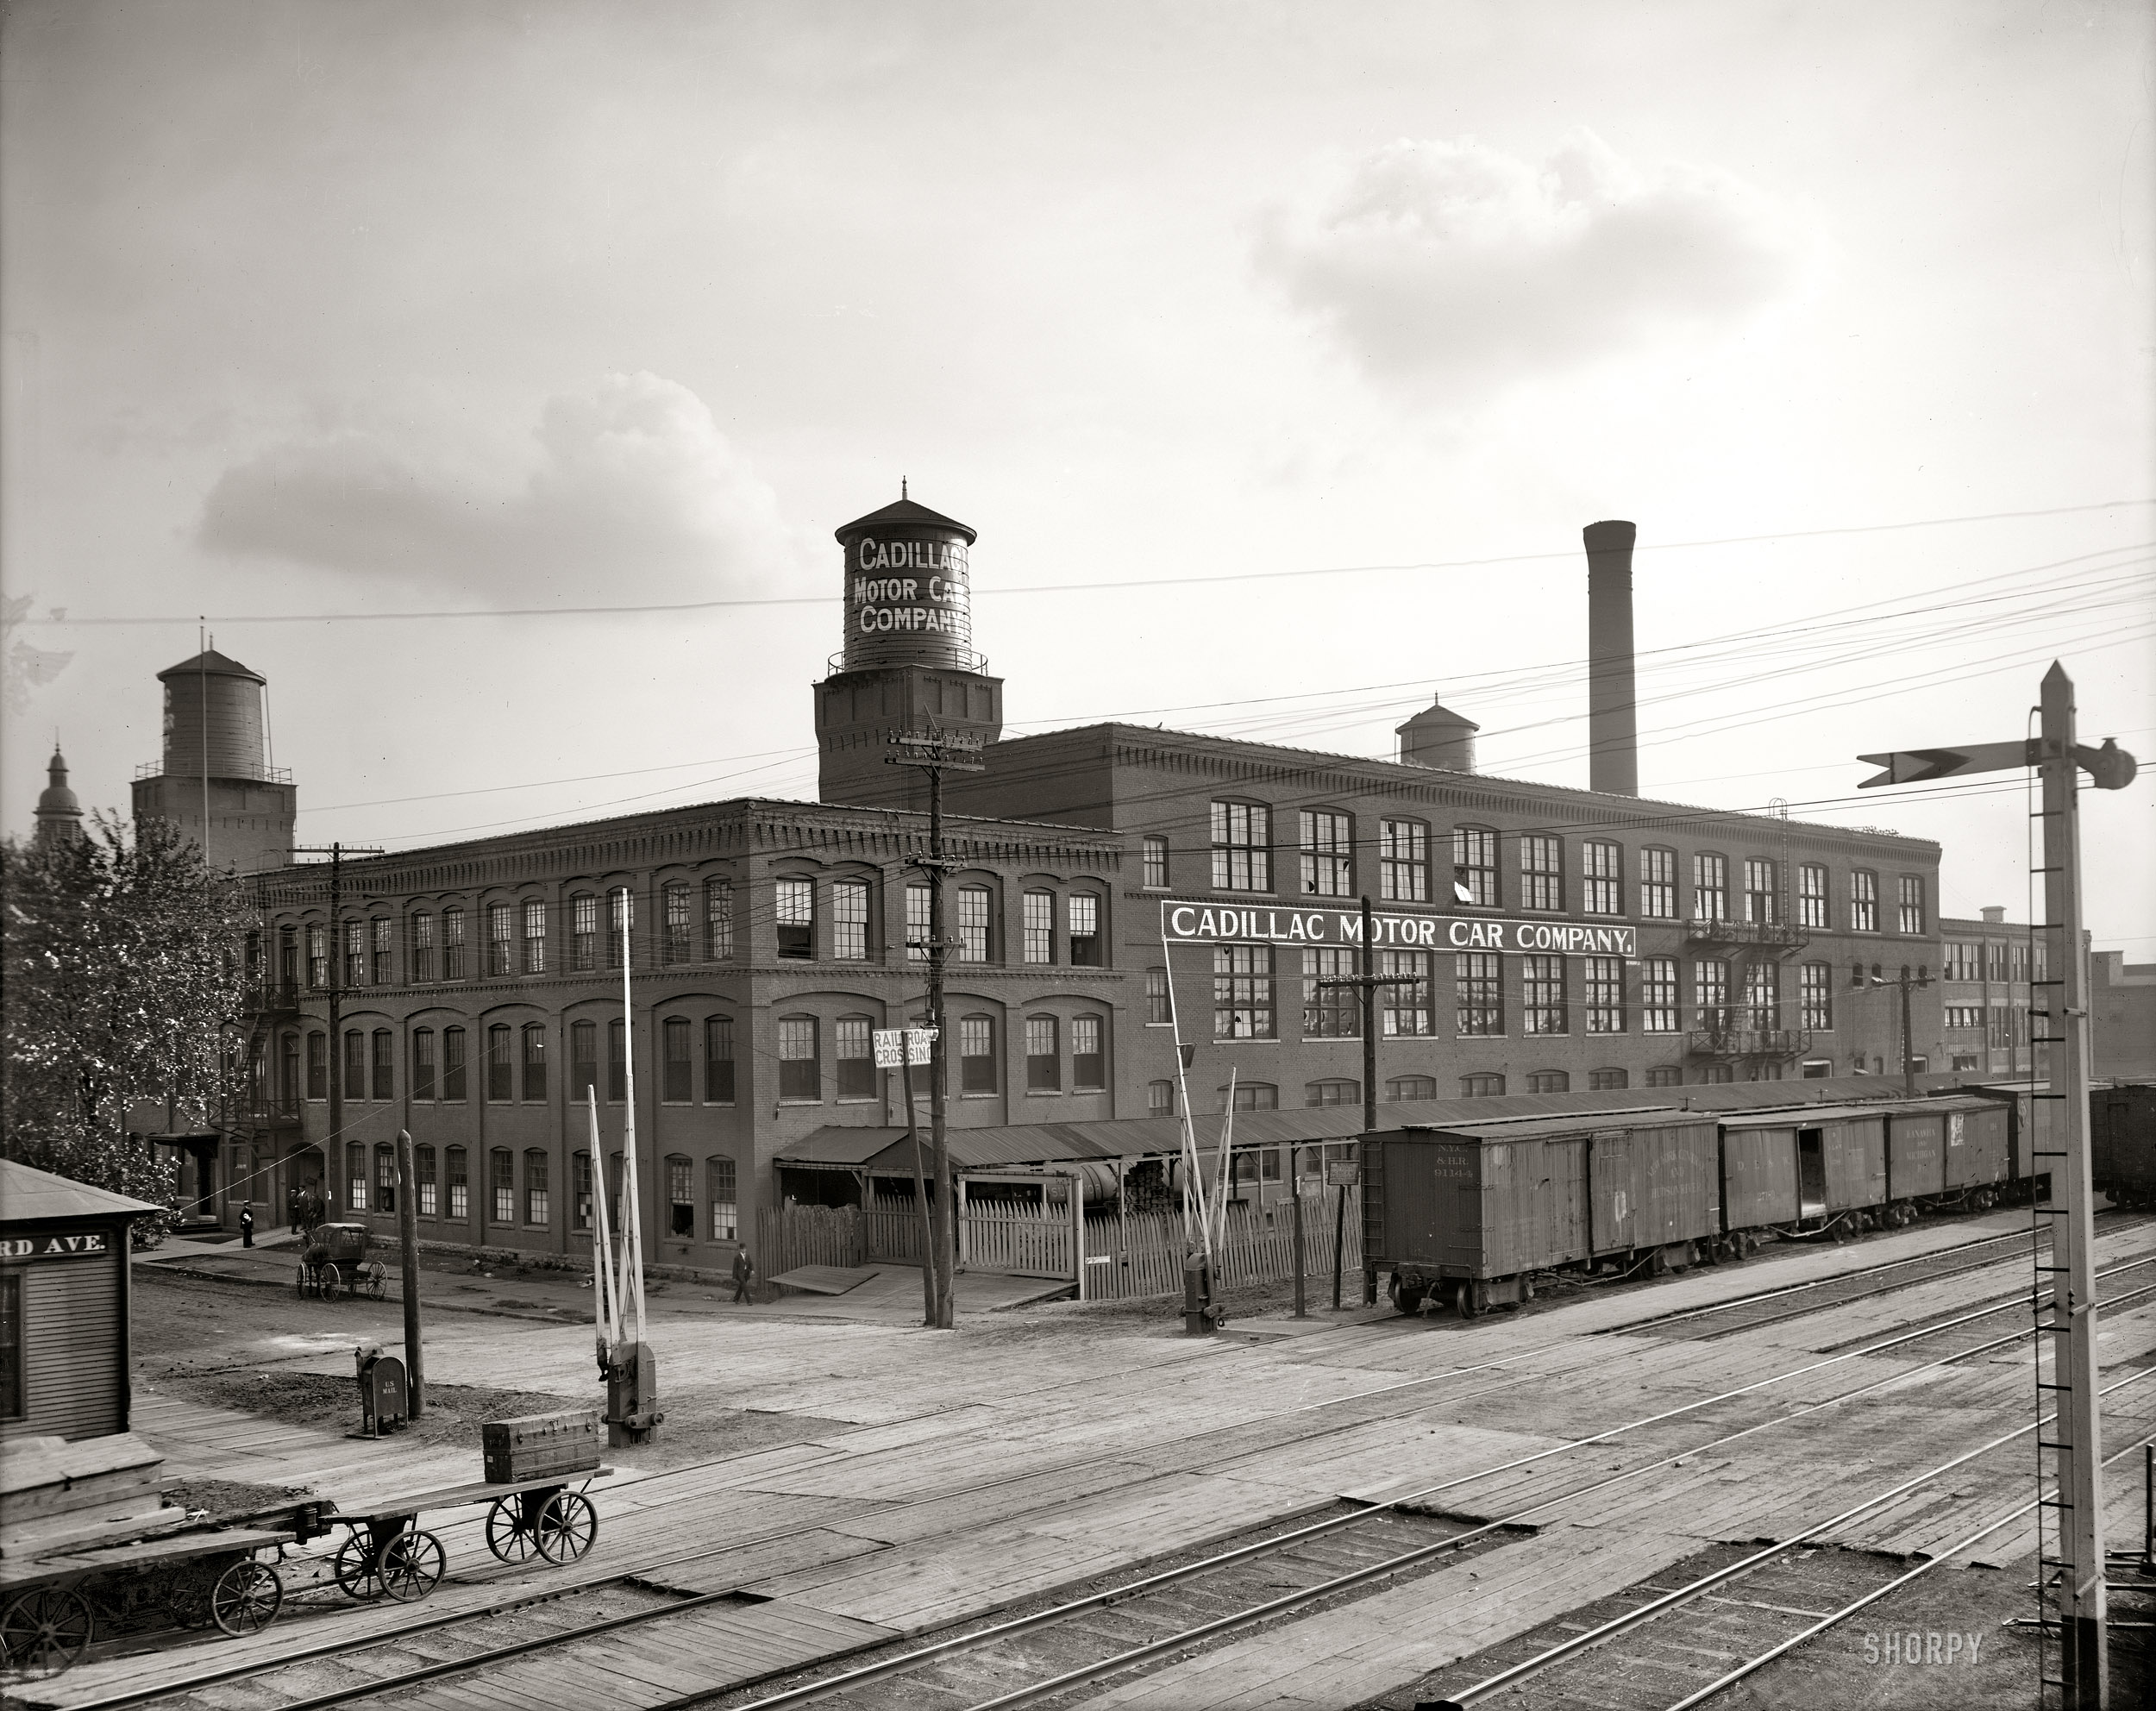 Detroit circa 1908. "Cadillac Motor Car Company." Cradle of the tailfin. 8x10 inch dry plate glass negative, Detroit Publishing Company. View full size.